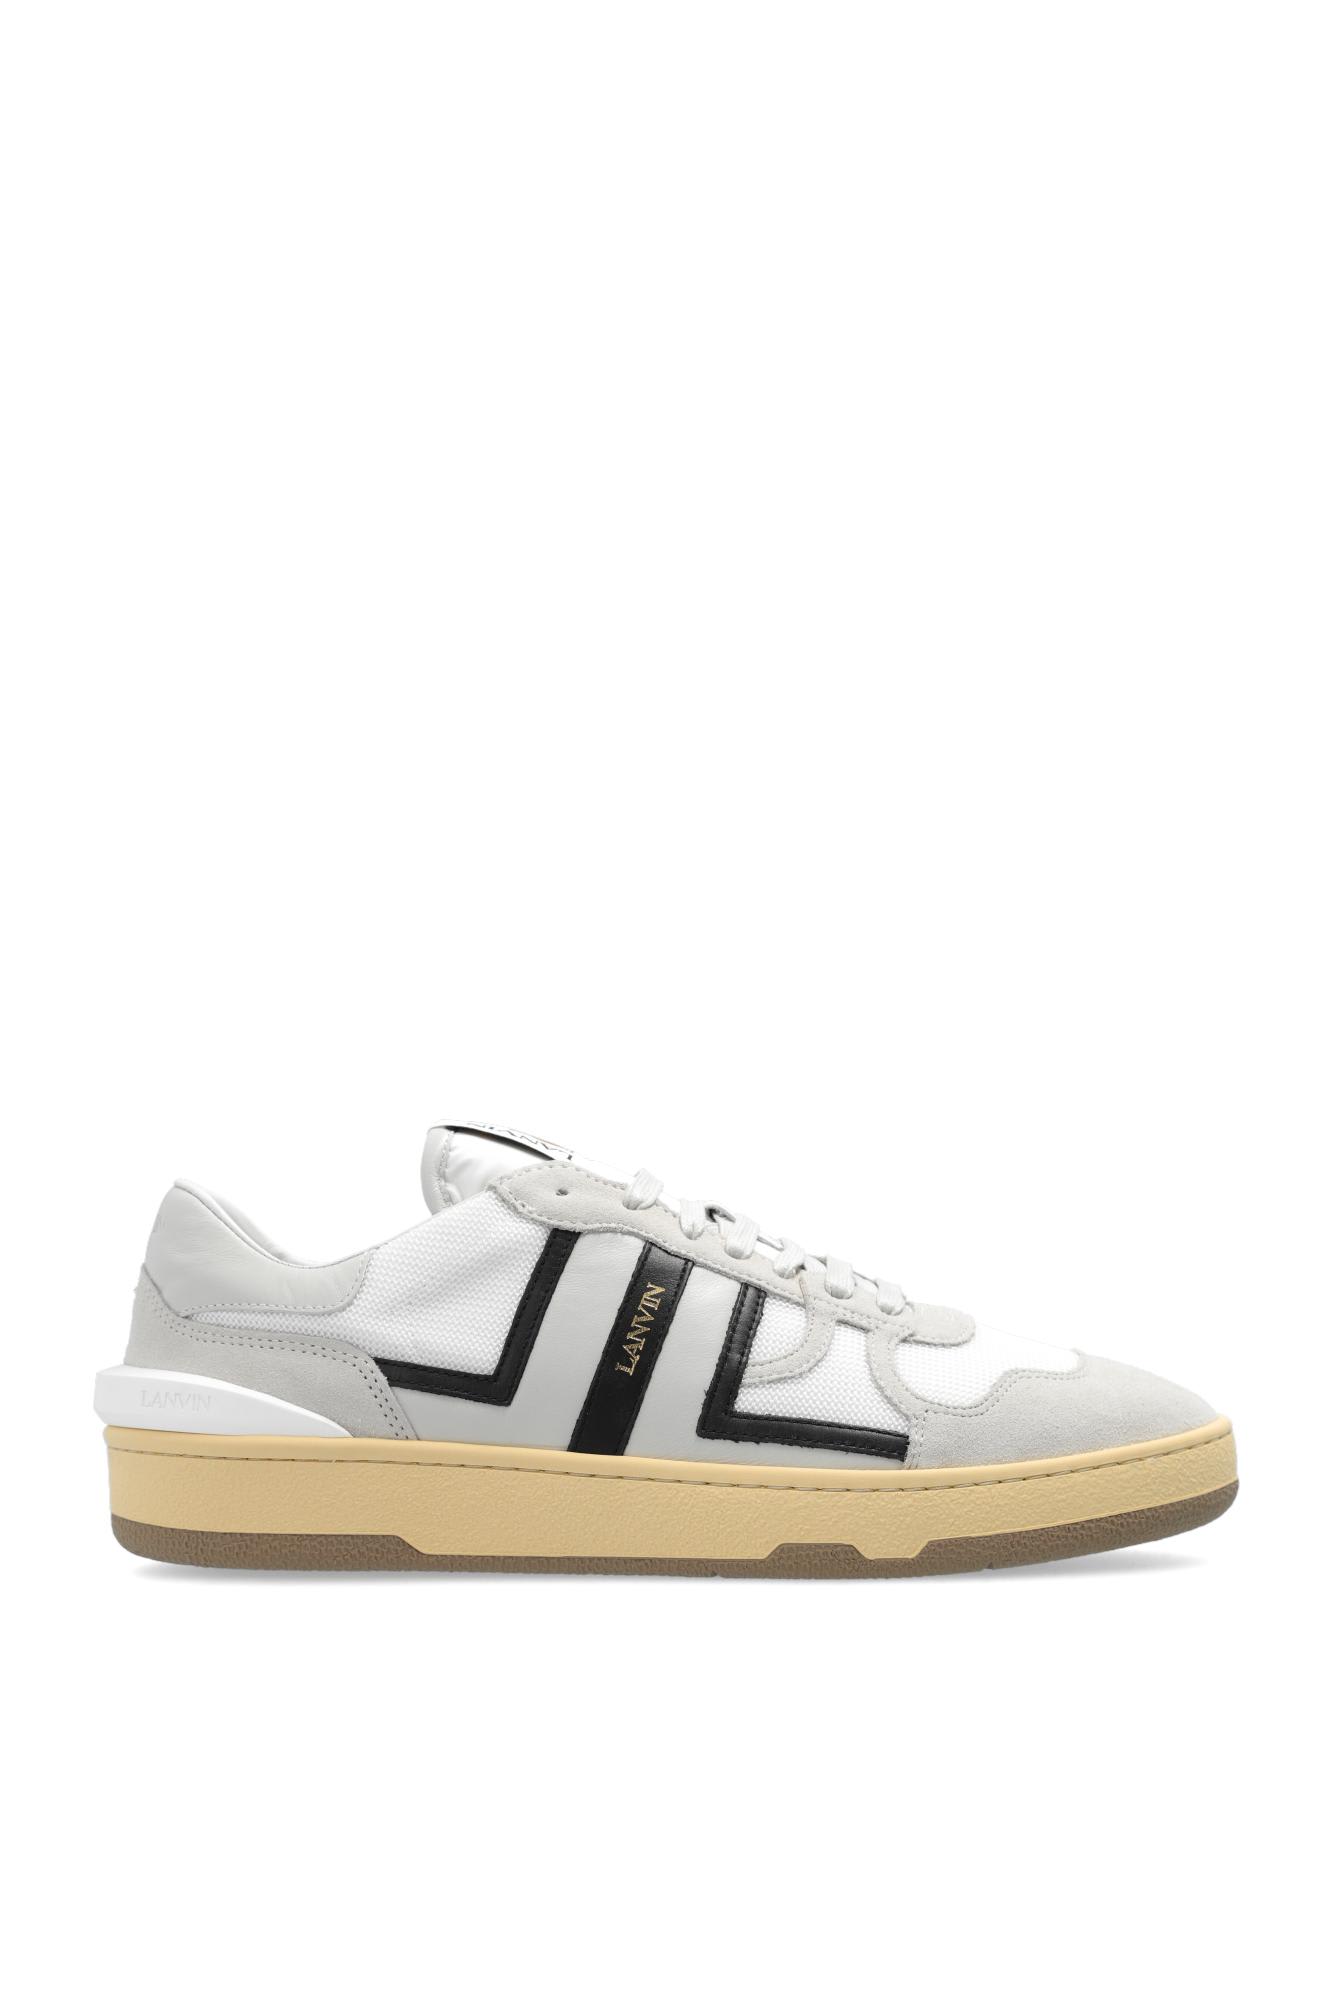 Lanvin Clay Low Sneakers In Black/off White